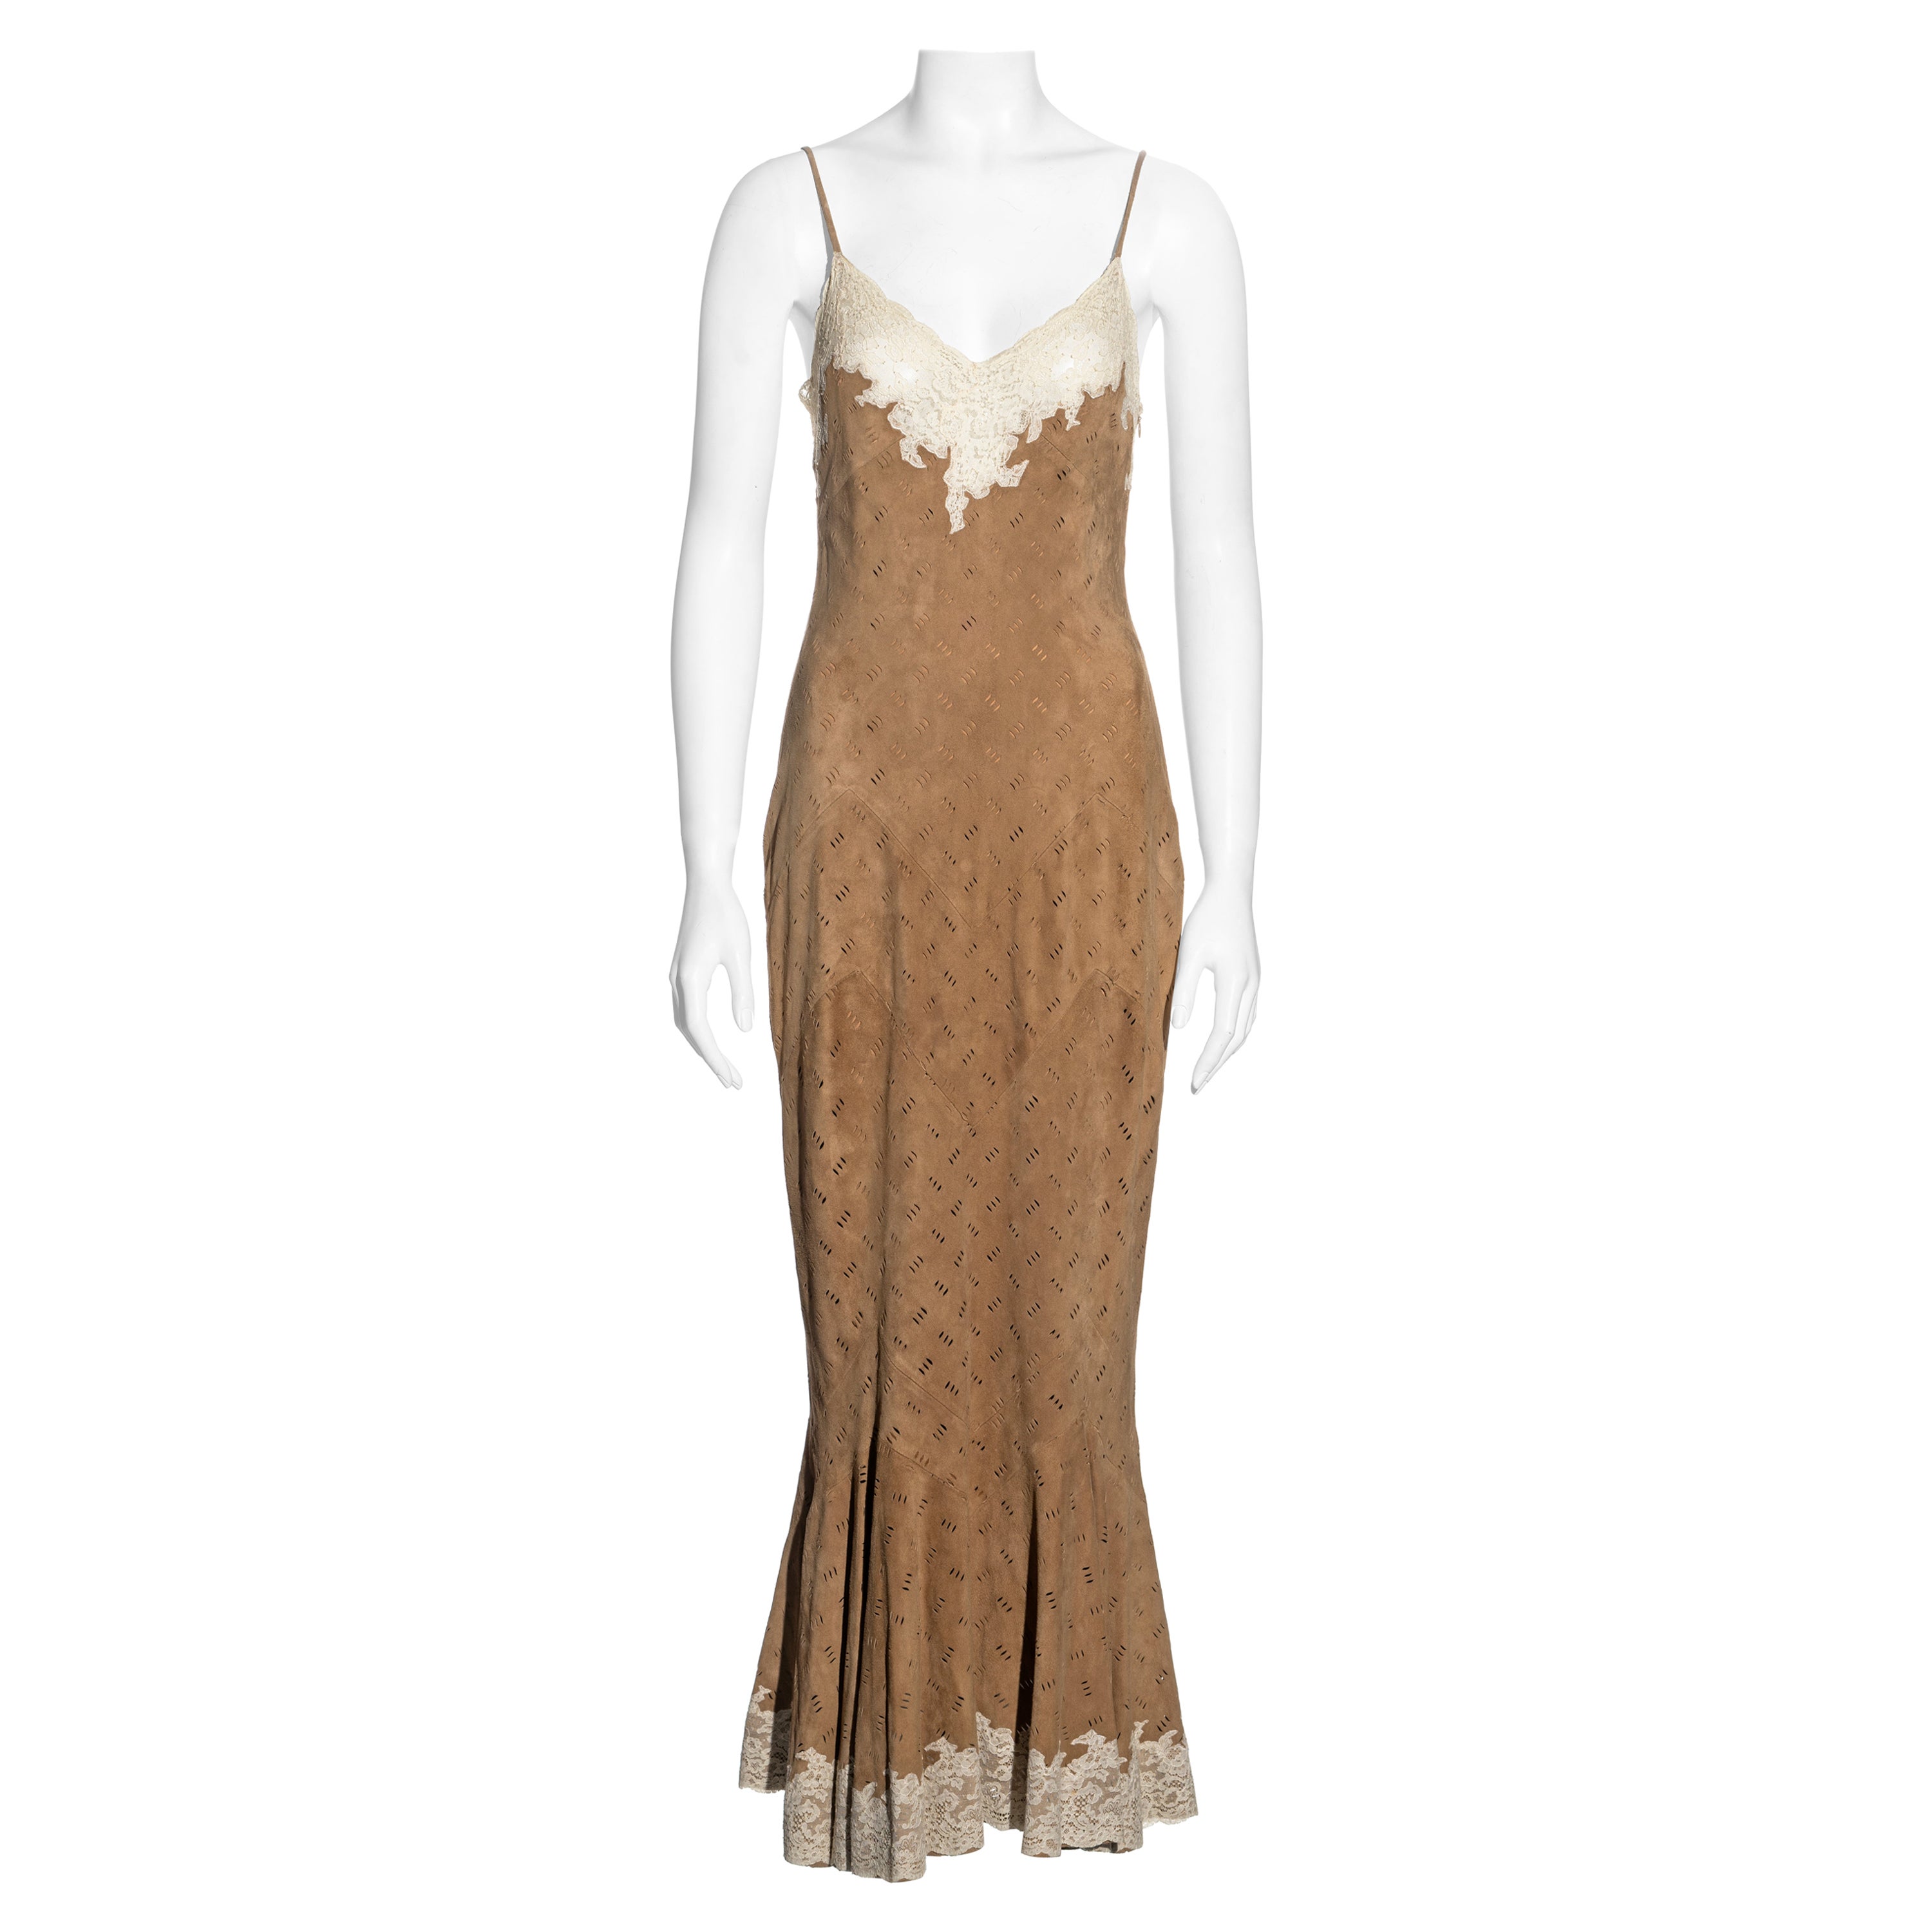 Christian Dior by John Galliano Brown and Cream Suede and Lace Dress, FW 1999 For Sale